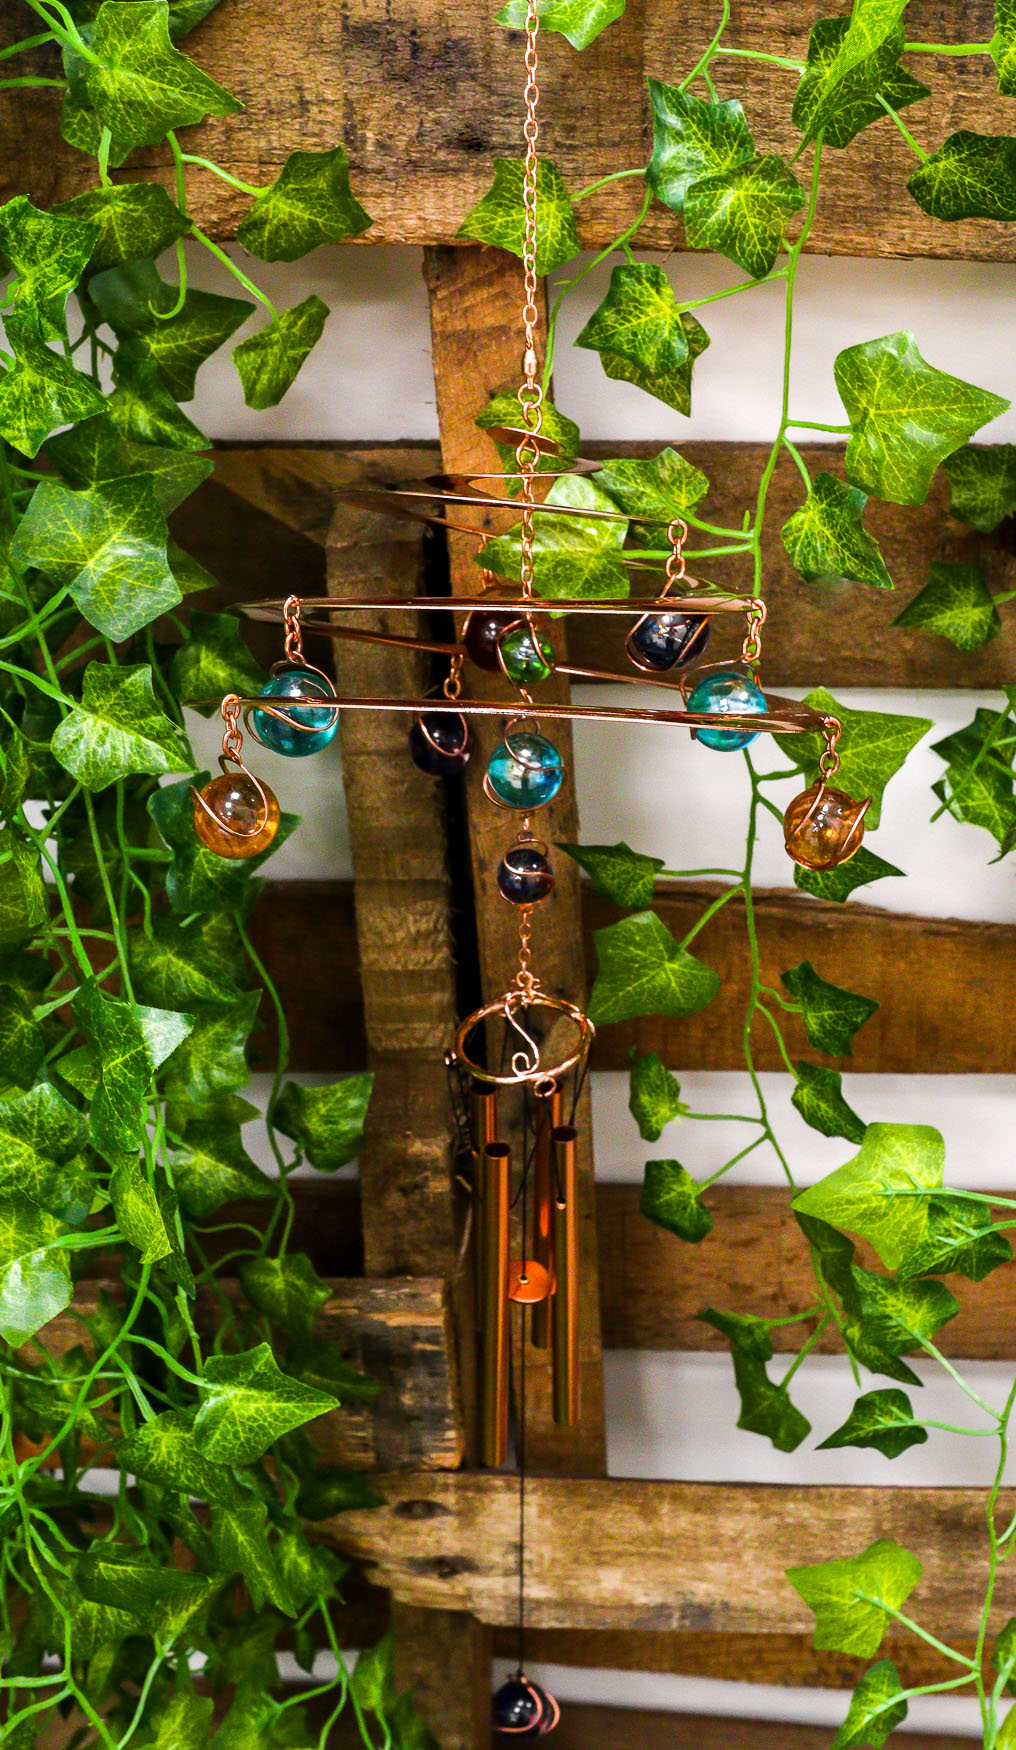 Ebros Gift Spiral Galaxy Copper Metal Wind Chime With Colorful Marbles - image 4 of 9